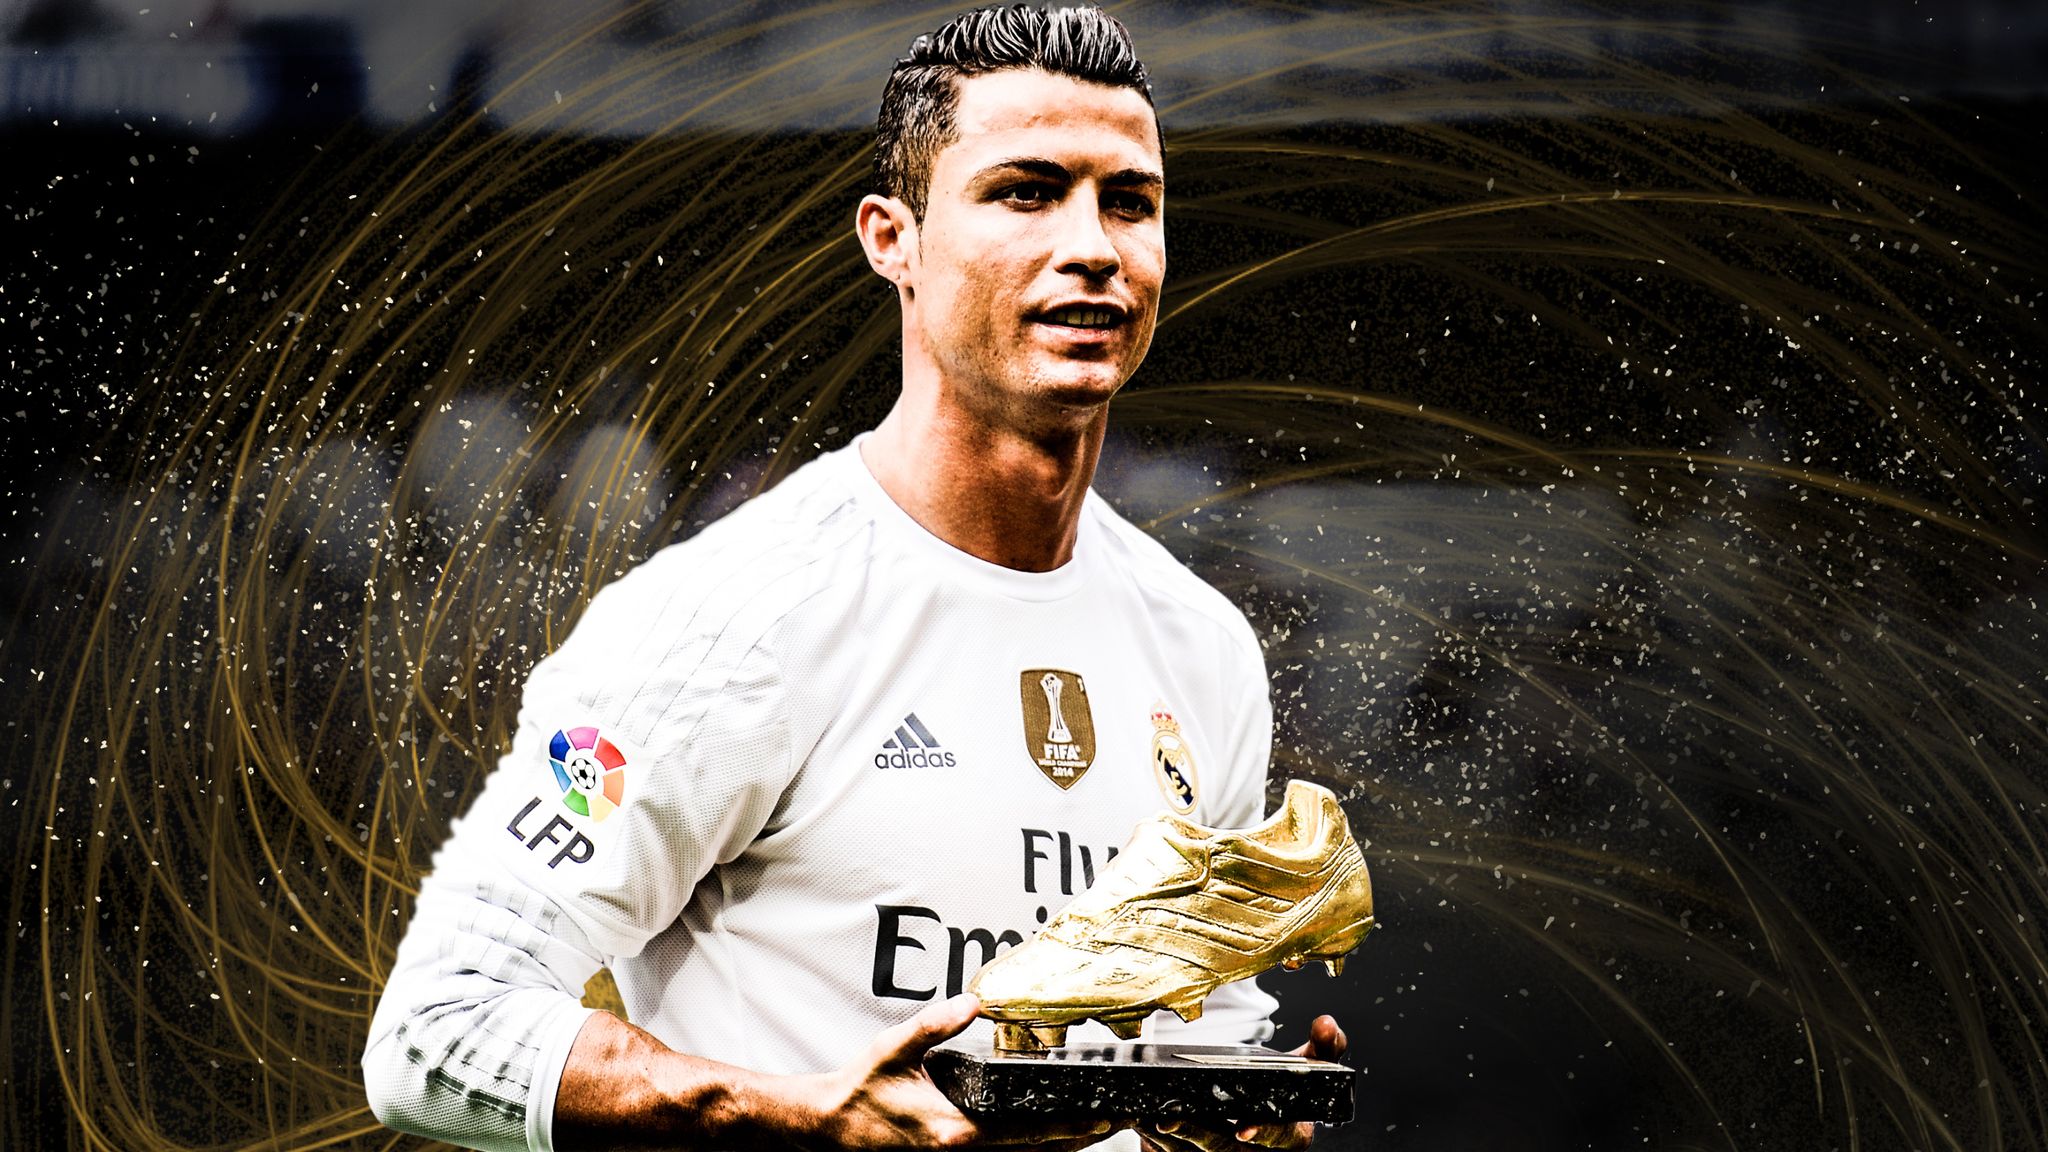 Cristiano Ronaldo hat-tricks: How many does CR7 have in his career?